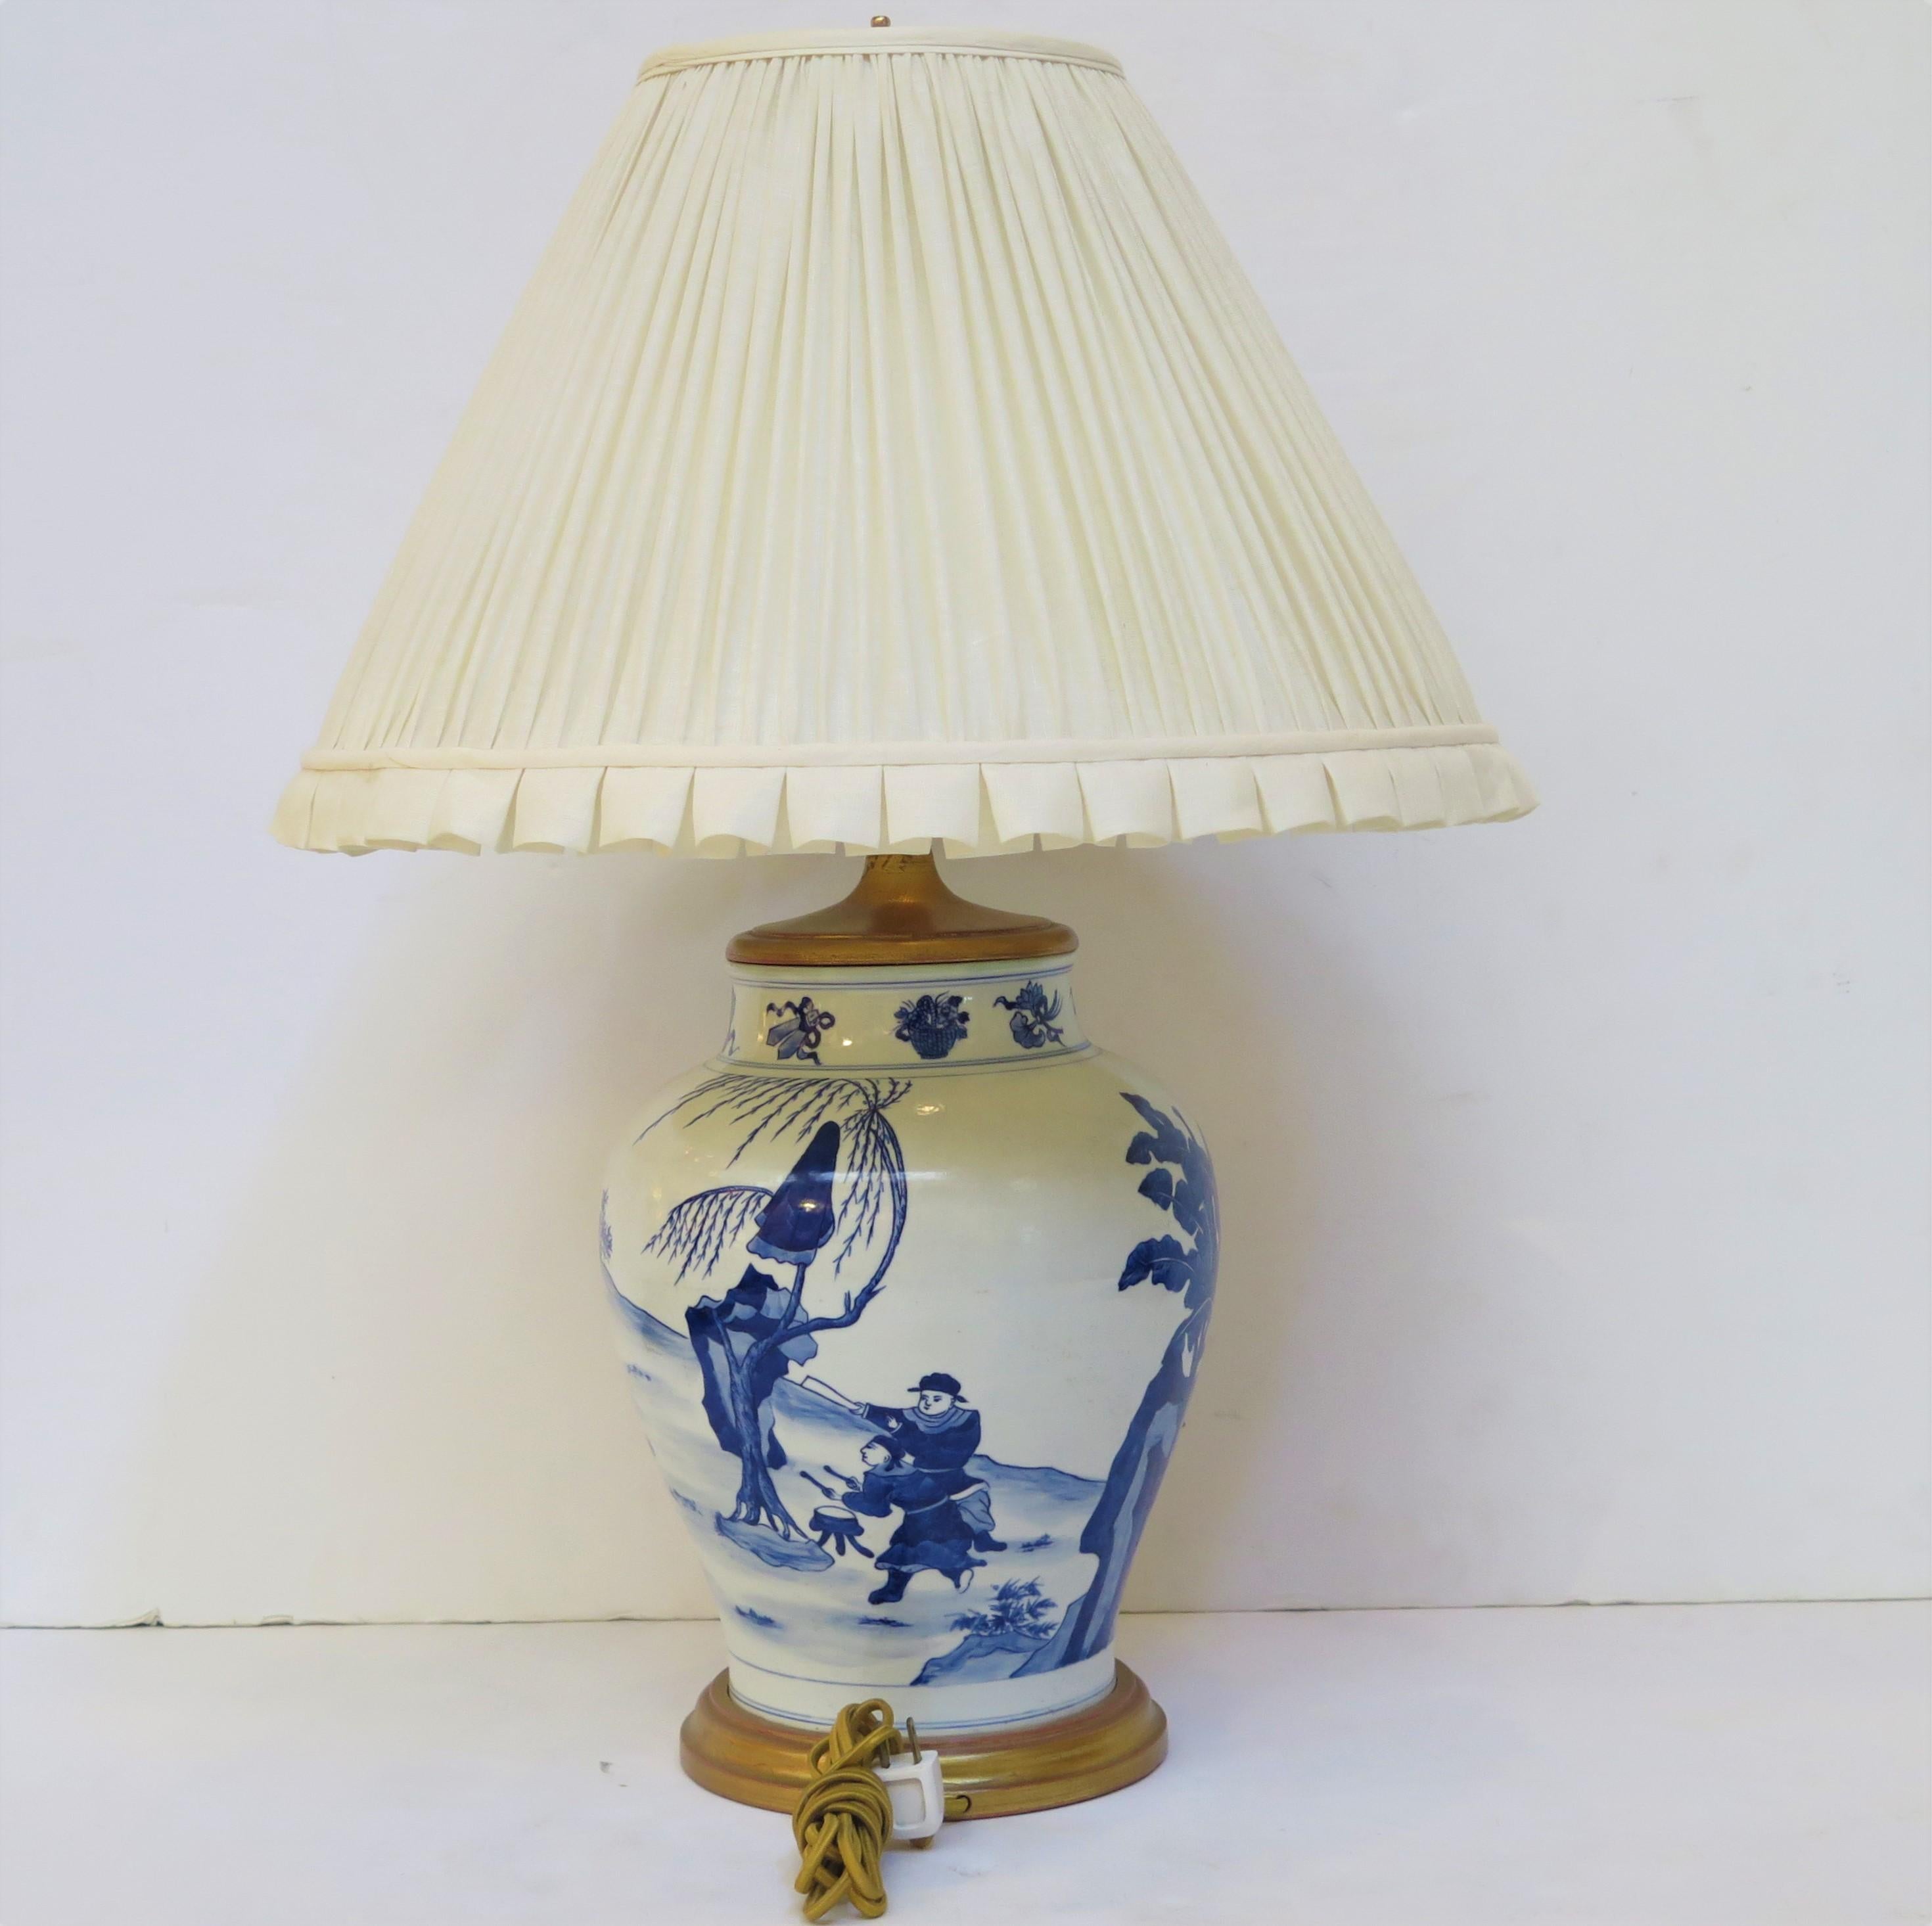 Chinoiserie A Blue and White Chinese Porcelain Lamp For Sale